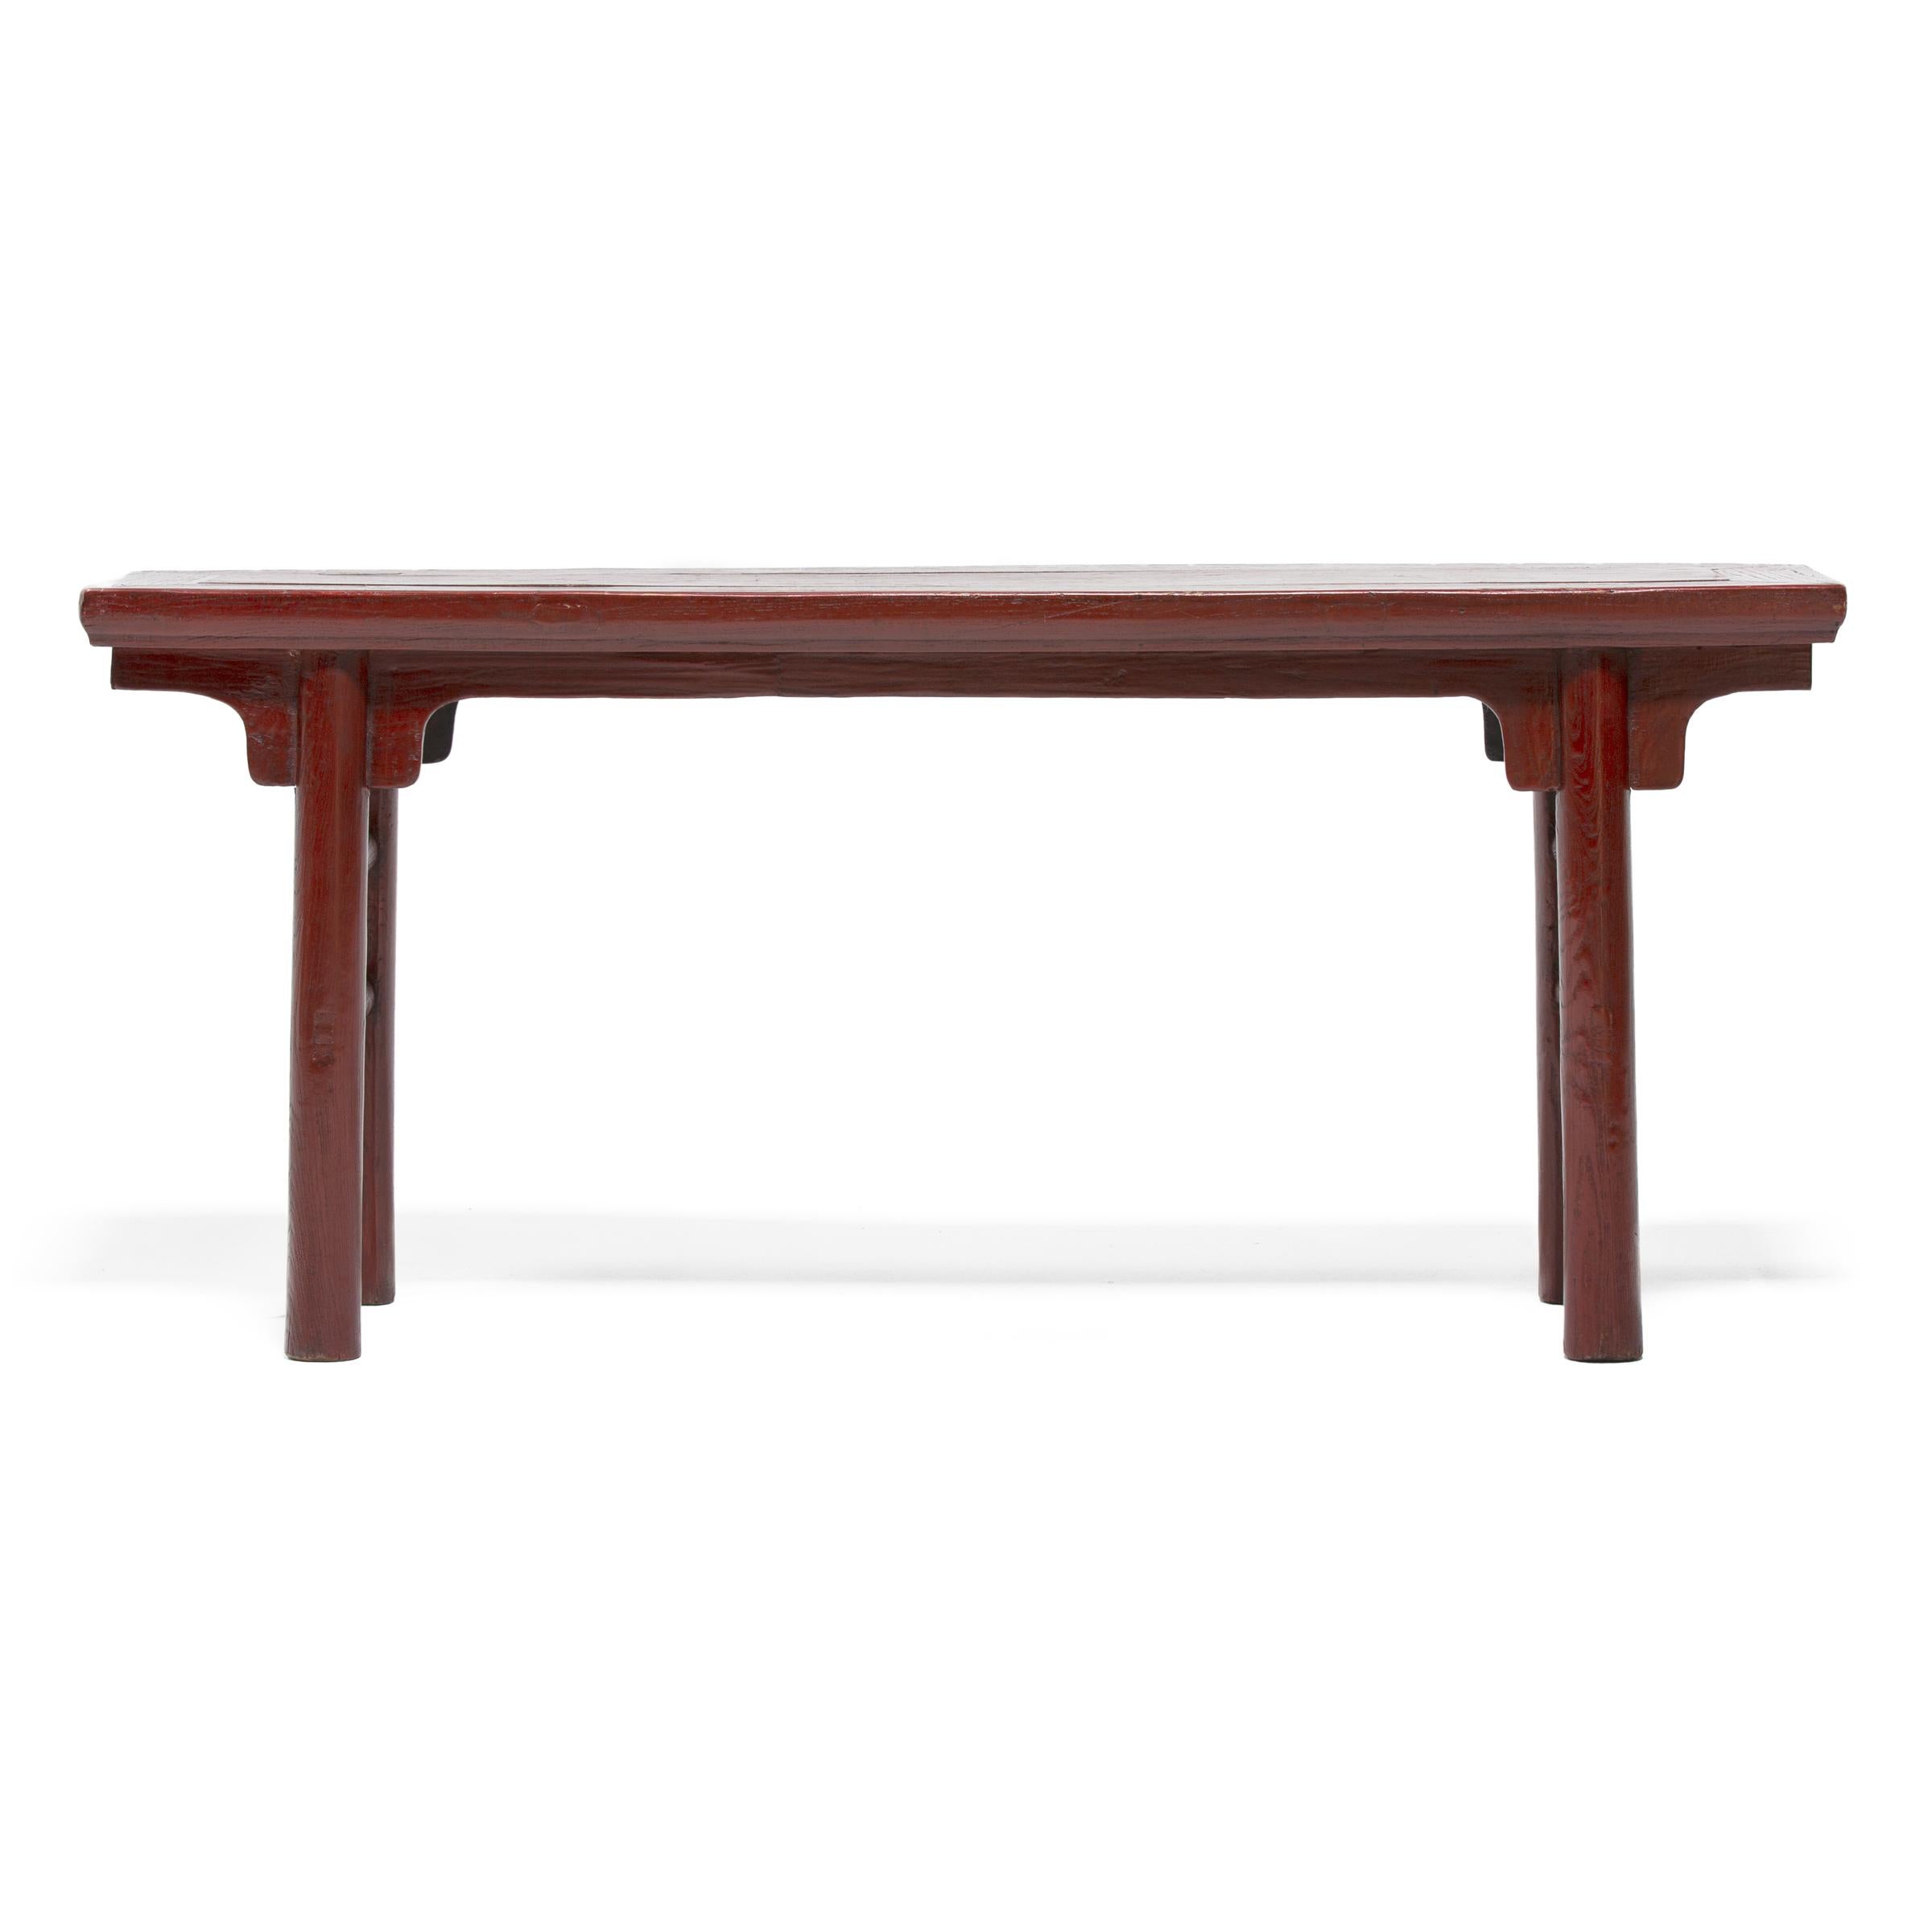 Lacquered Early 20th Century Chinese Red Lacquer Gate Bench